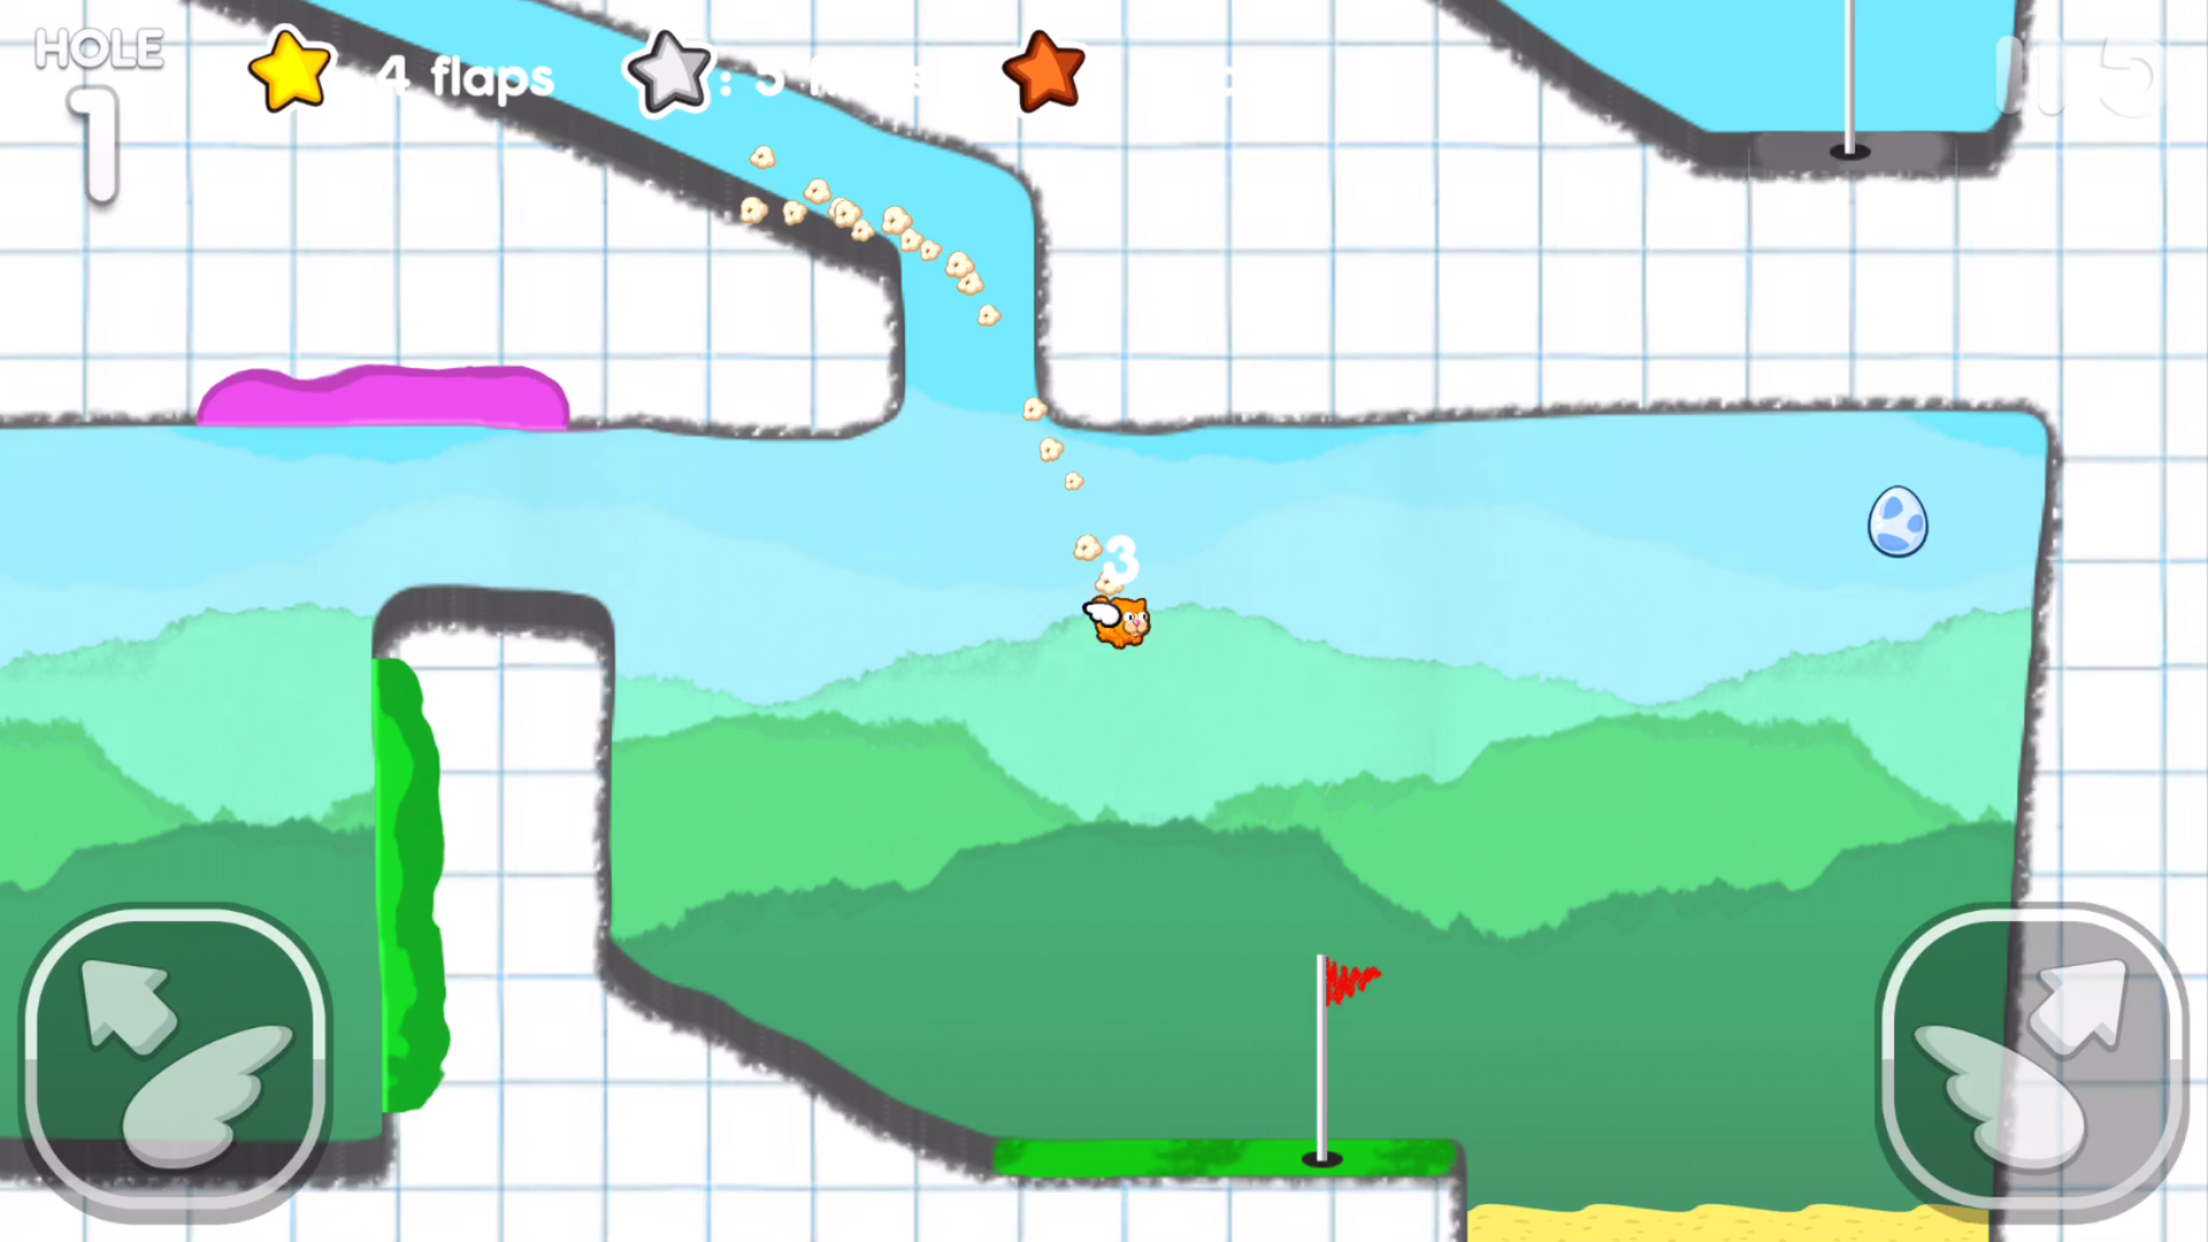 Flappy golf 2 play online